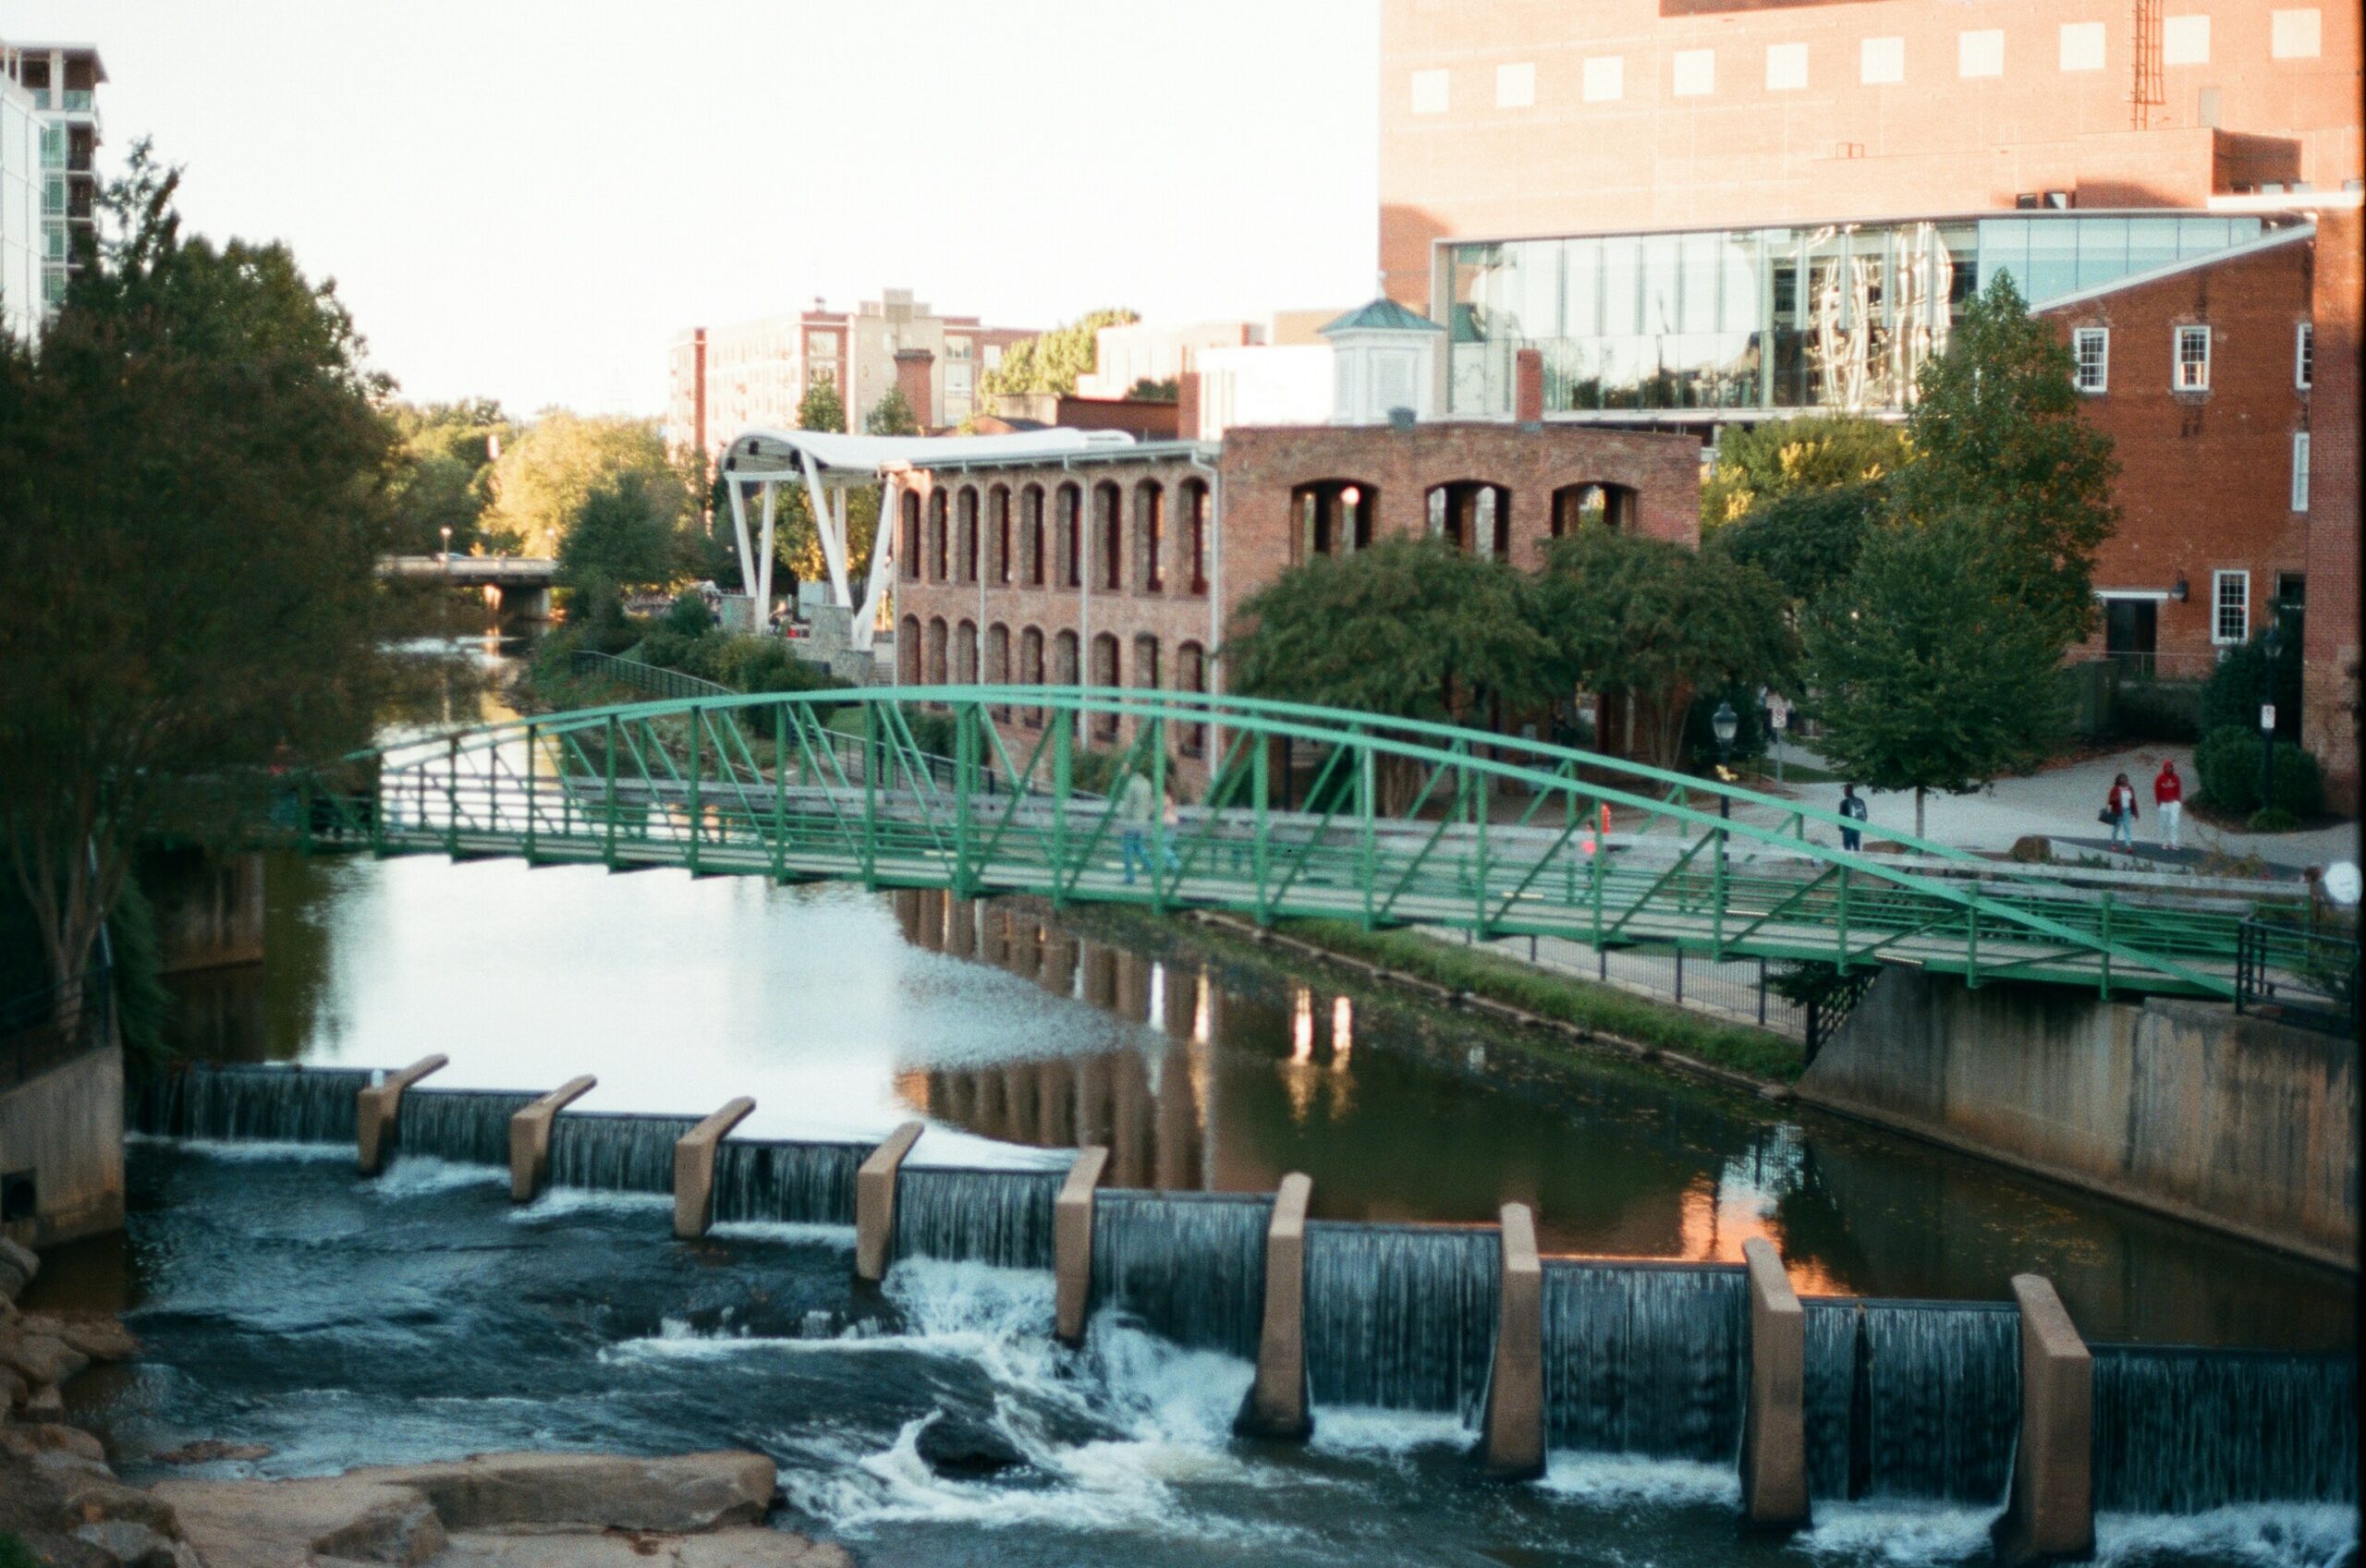 Greenville is one of the best places to live in South Carolina for those wanting to be close to the mountains and upstate area. Pictured: A view of Downtown Greenville